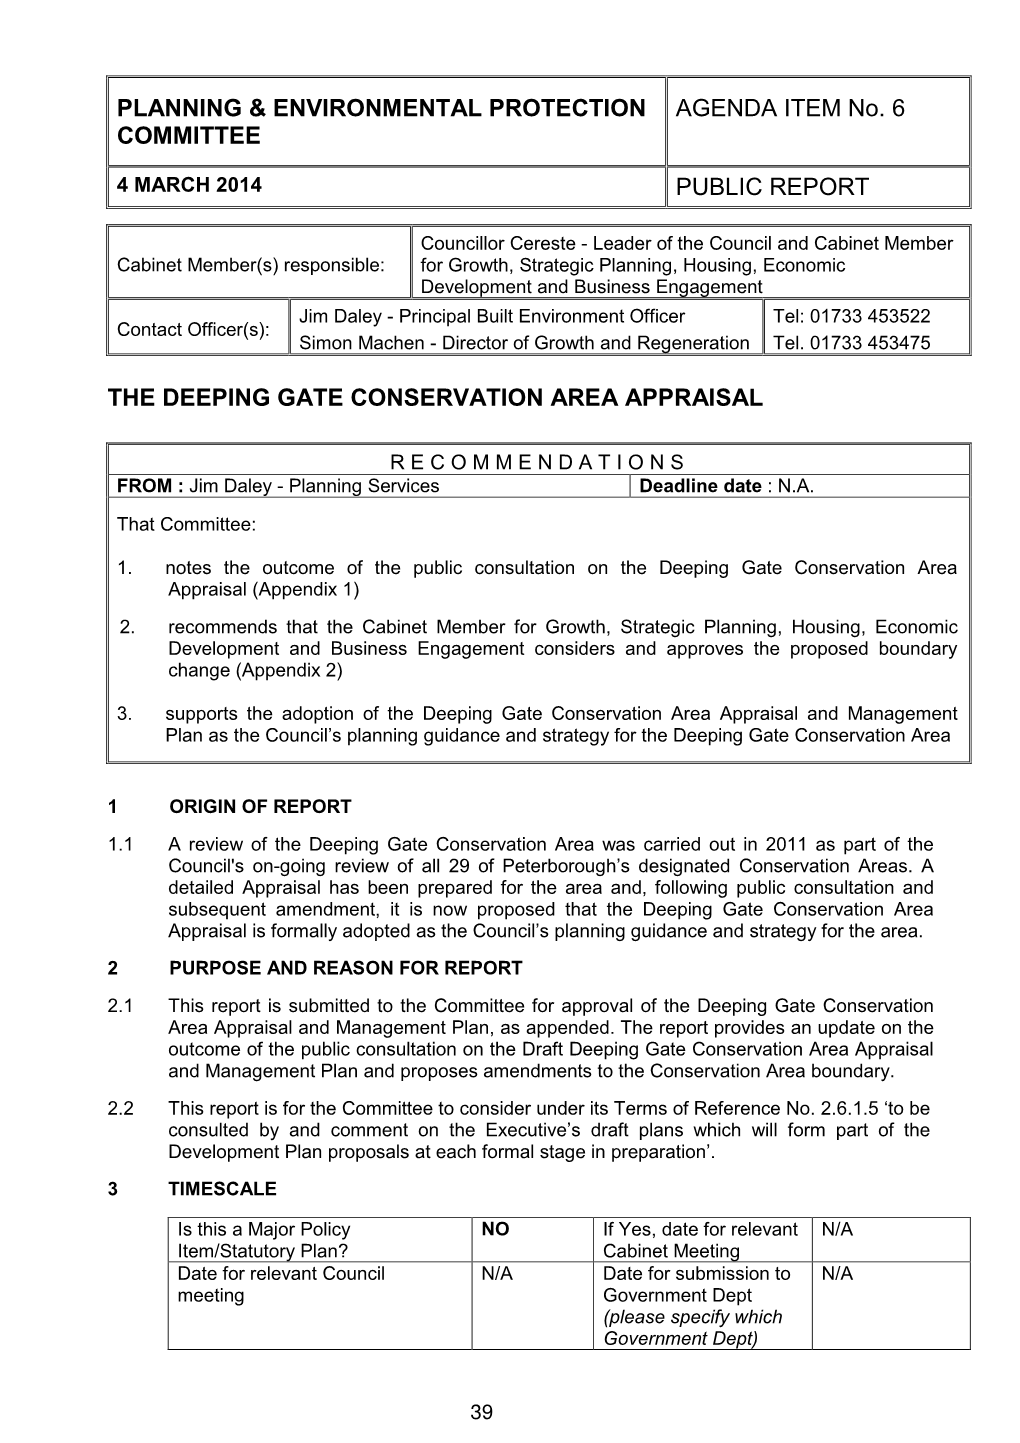 PLANNING & ENVIRONMENTAL PROTECTION COMMITTEE AGENDA ITEM No. 6 PUBLIC REPORT the DEEPING GATE CONSERVATION AREA APPRAISAL